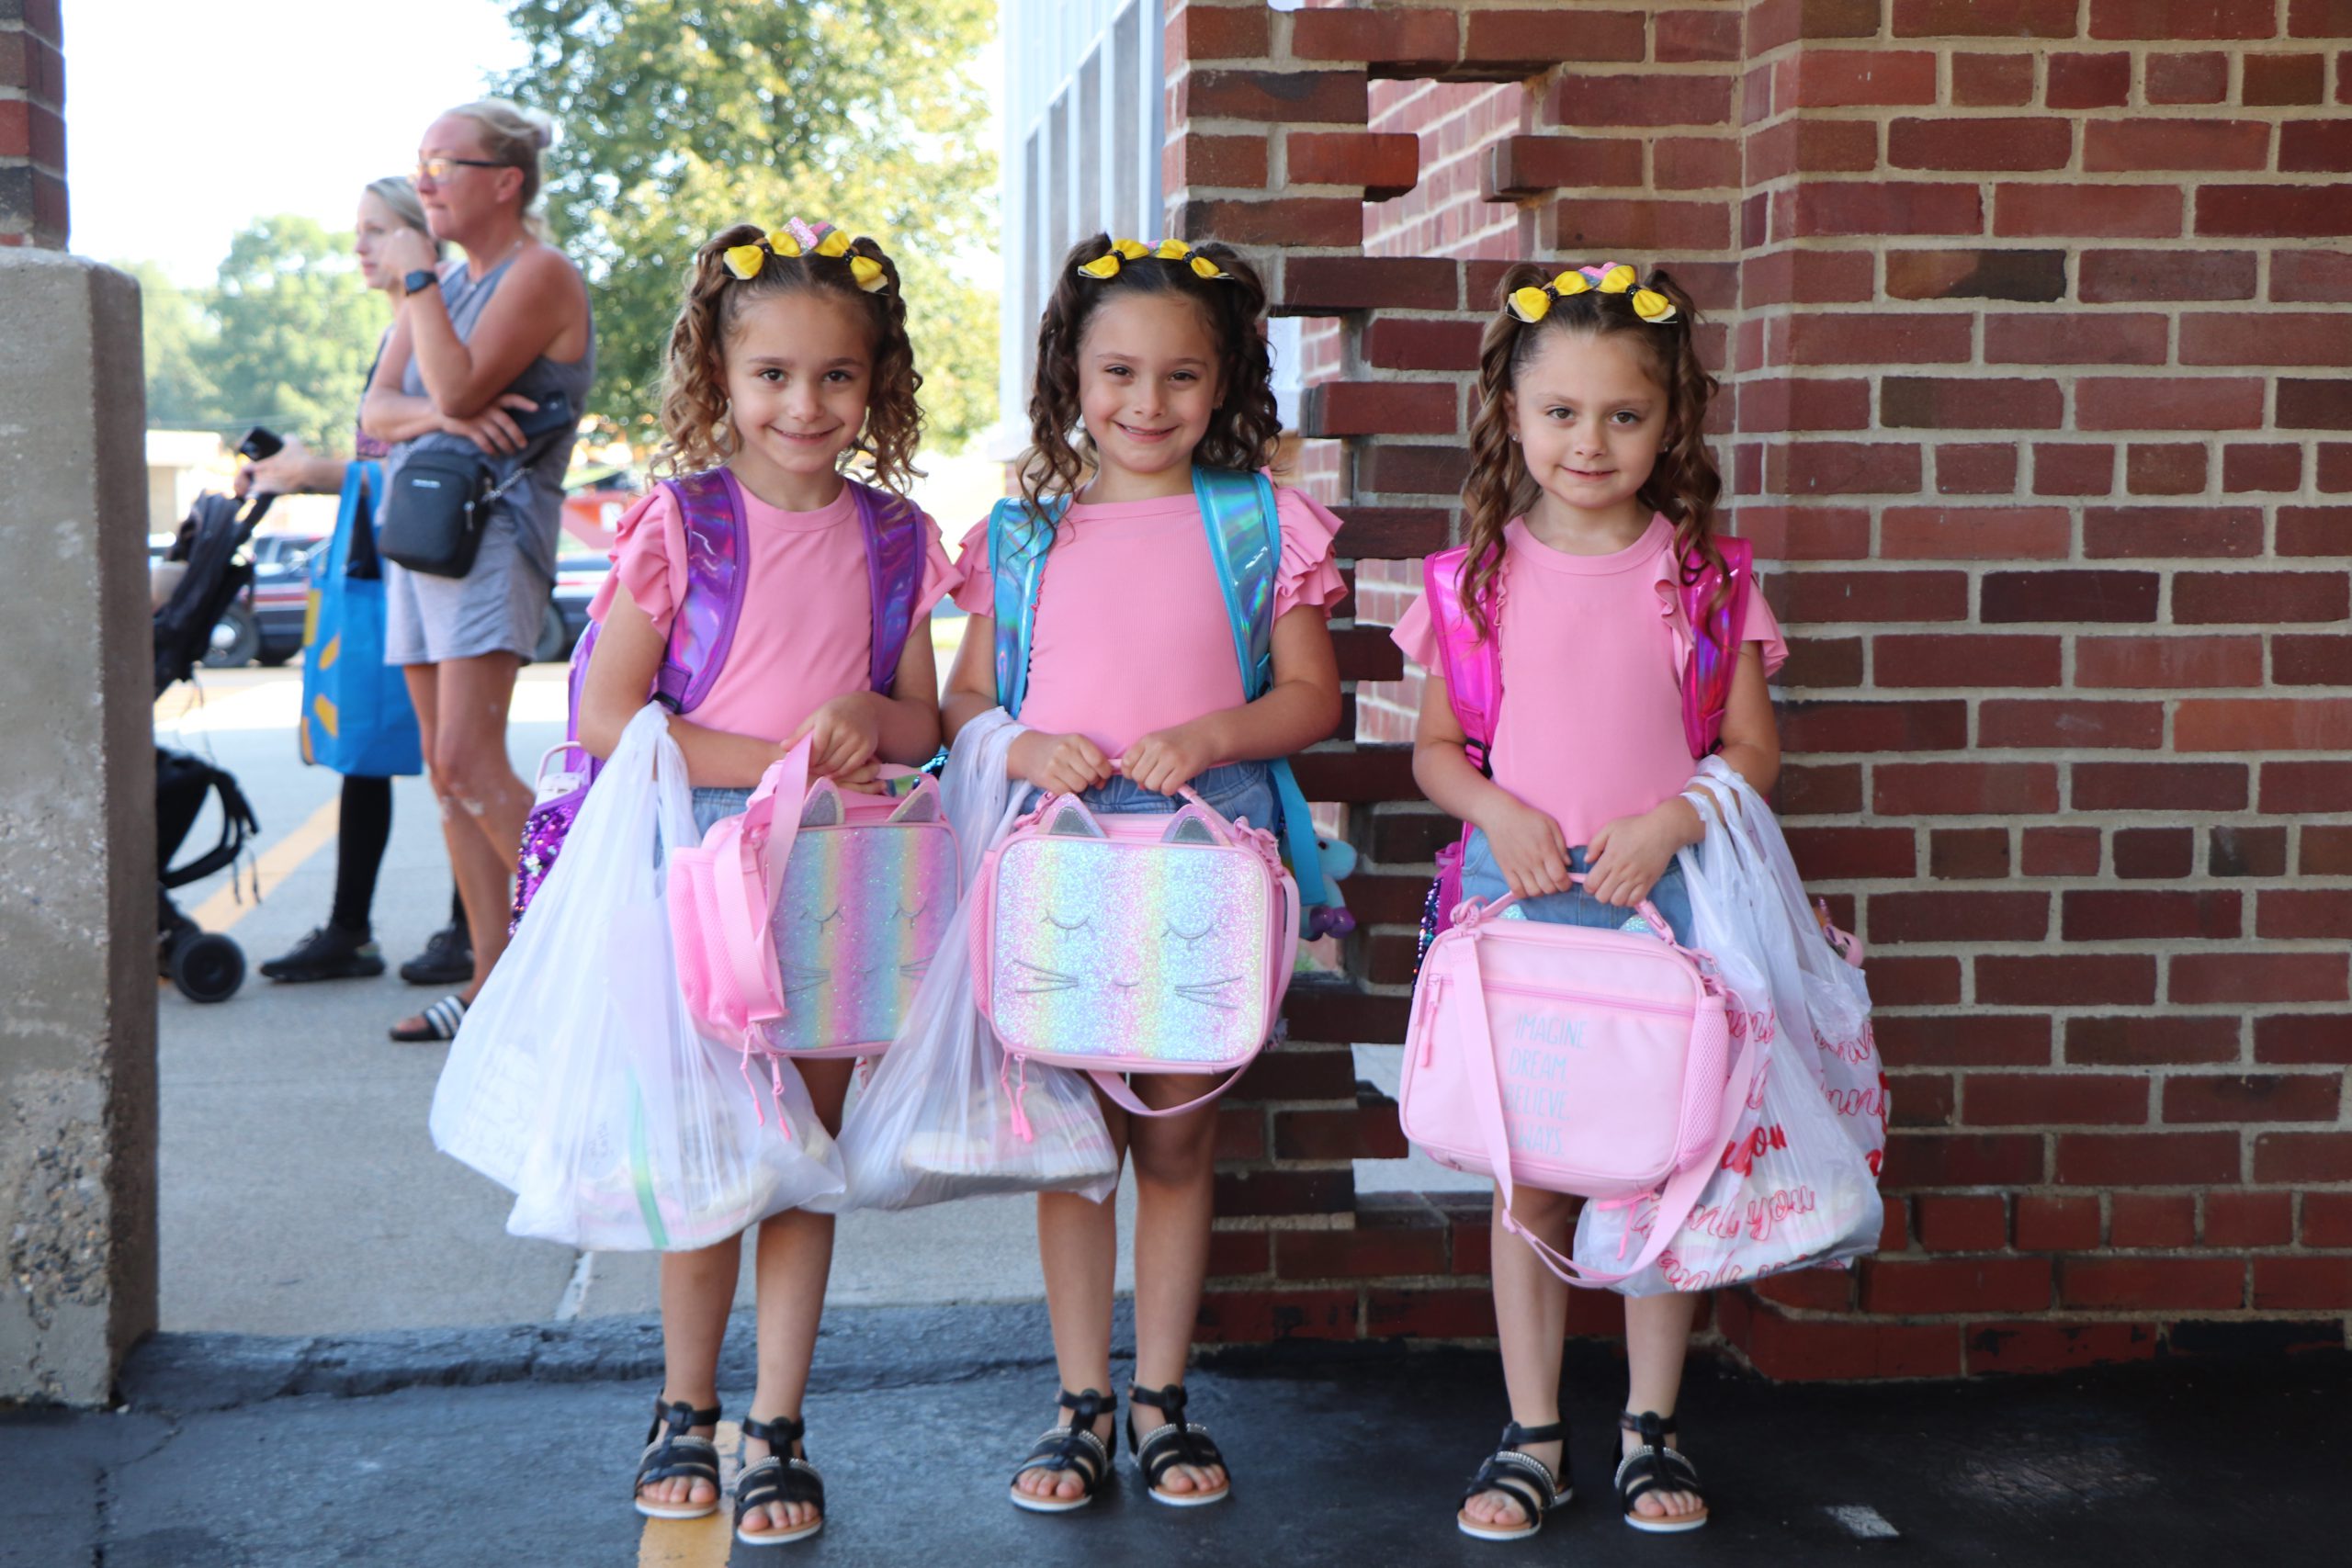 Triplets with pigtails, backpacks, lunch boxes, and plastic bags smile